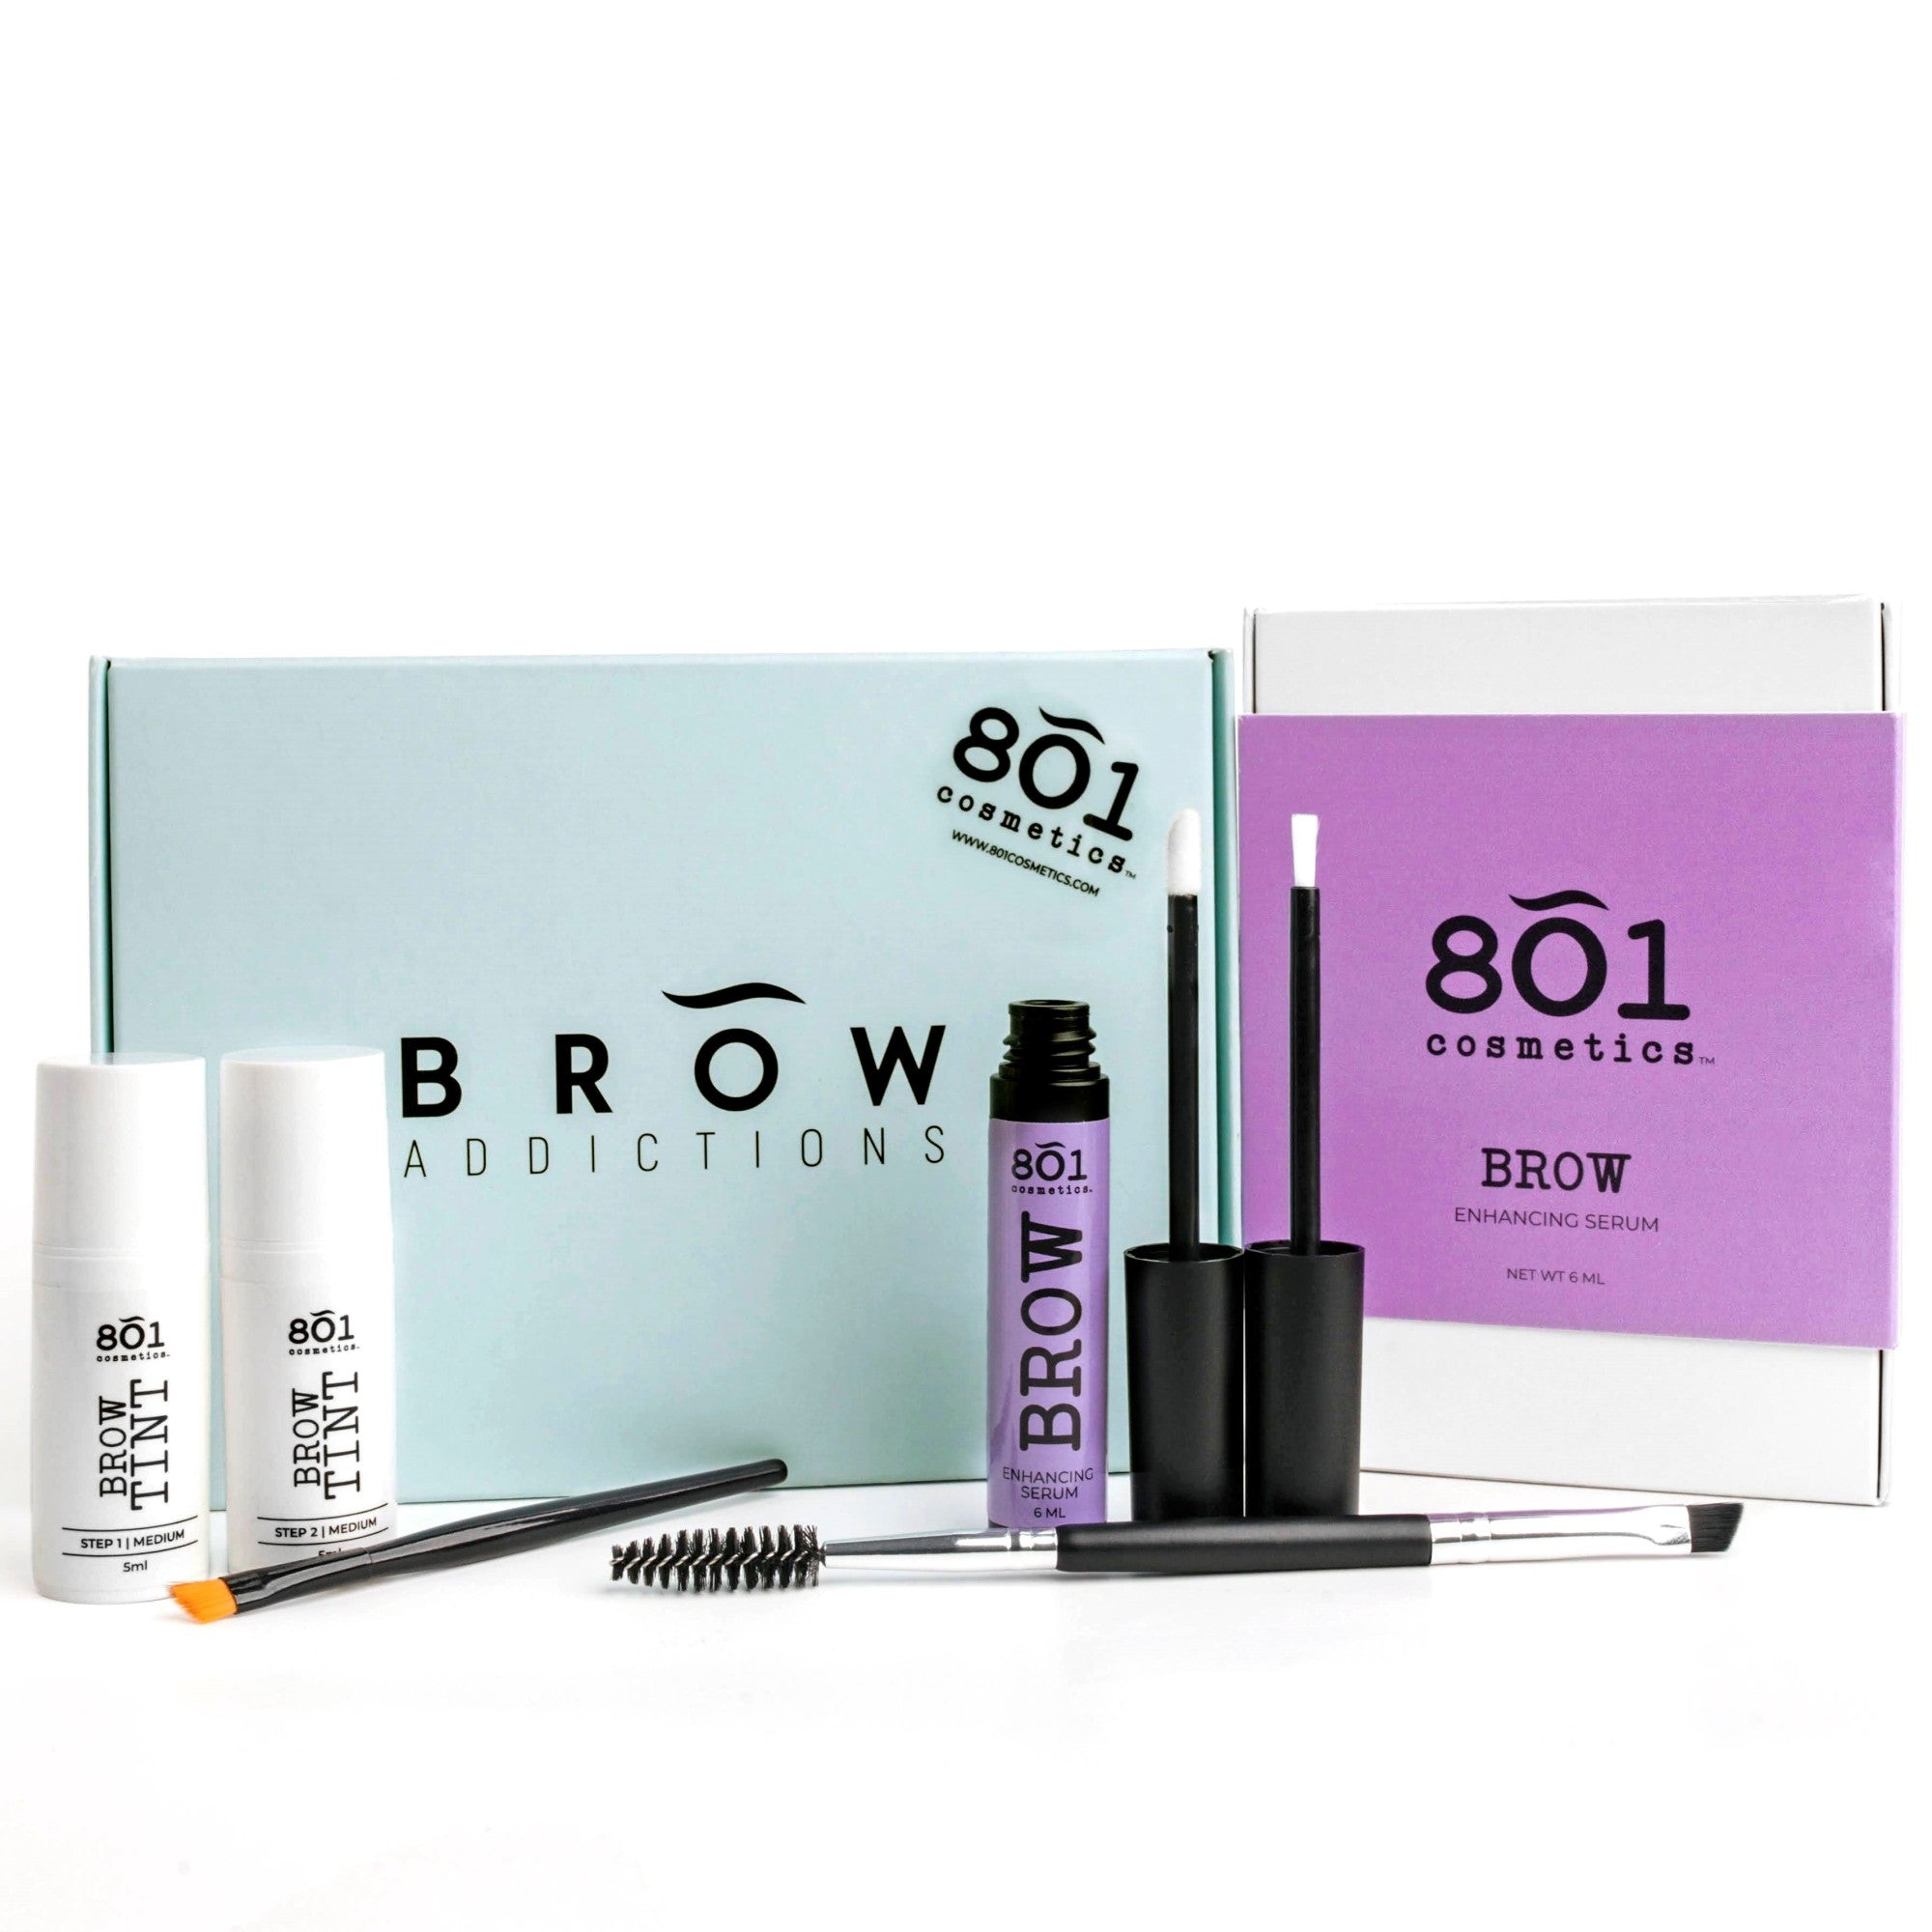 The Ultimate Brow Kit